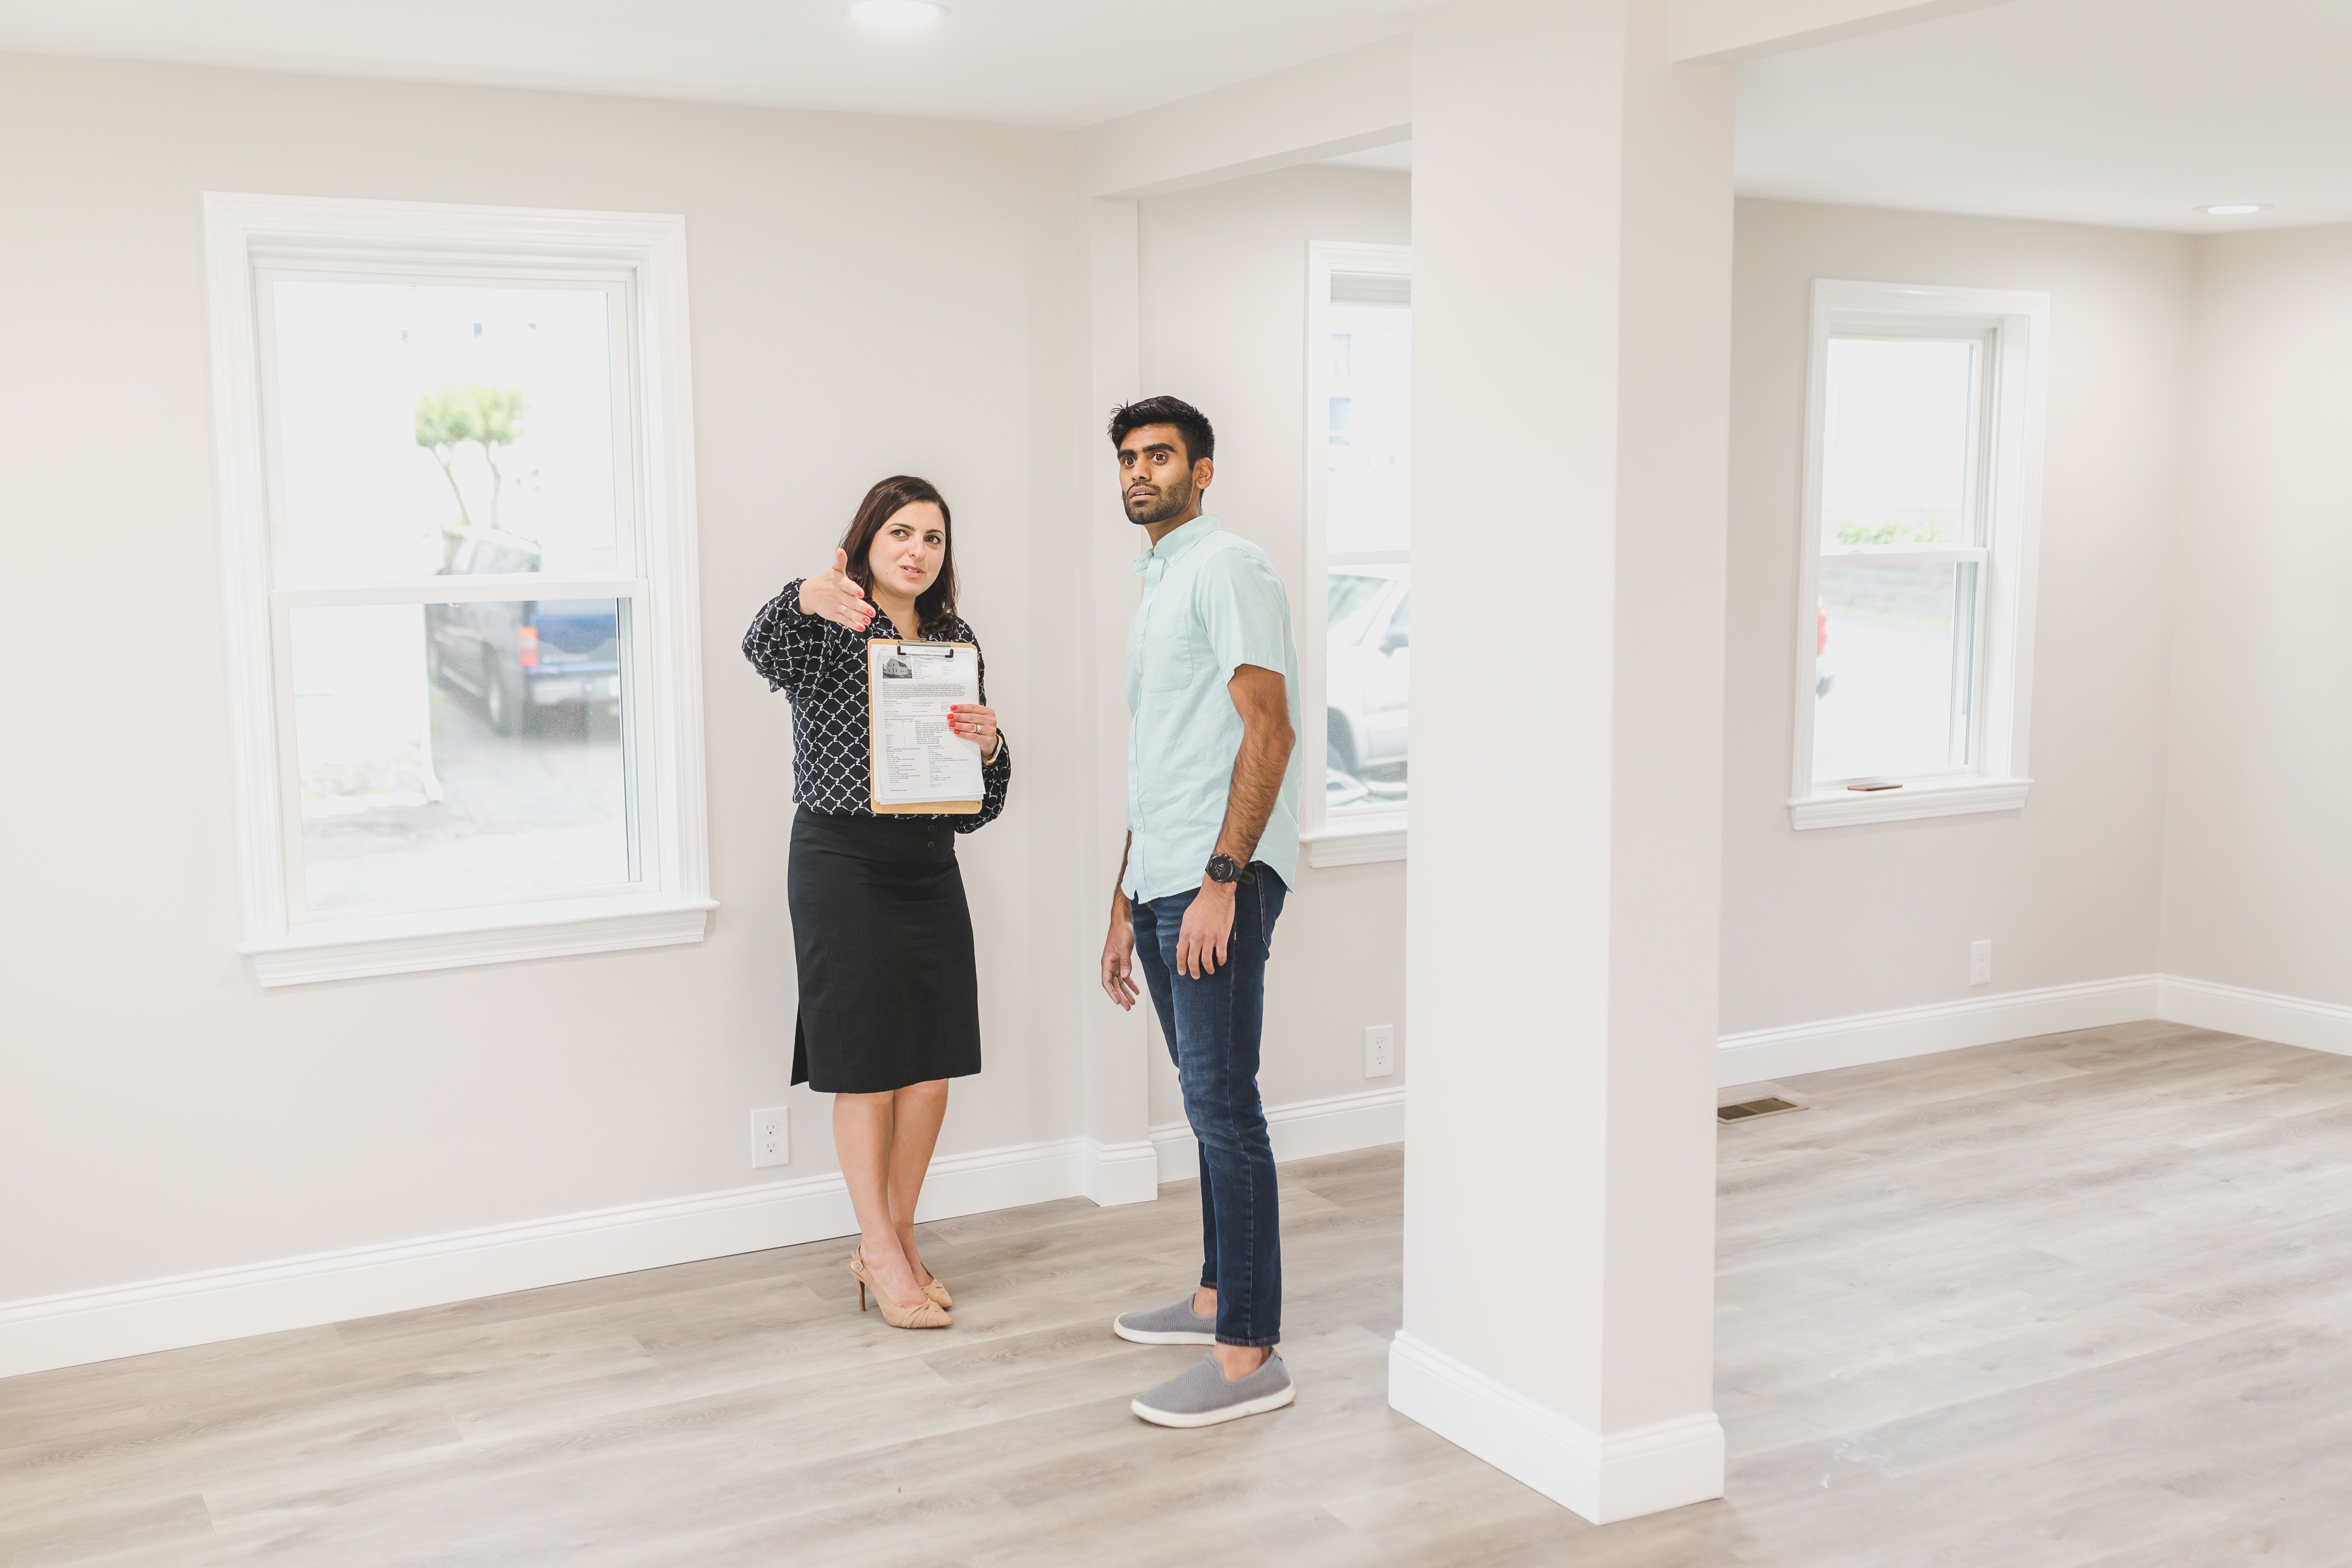 8 Tips for Real Estate Agents - Turning Your Sellers into Buyers